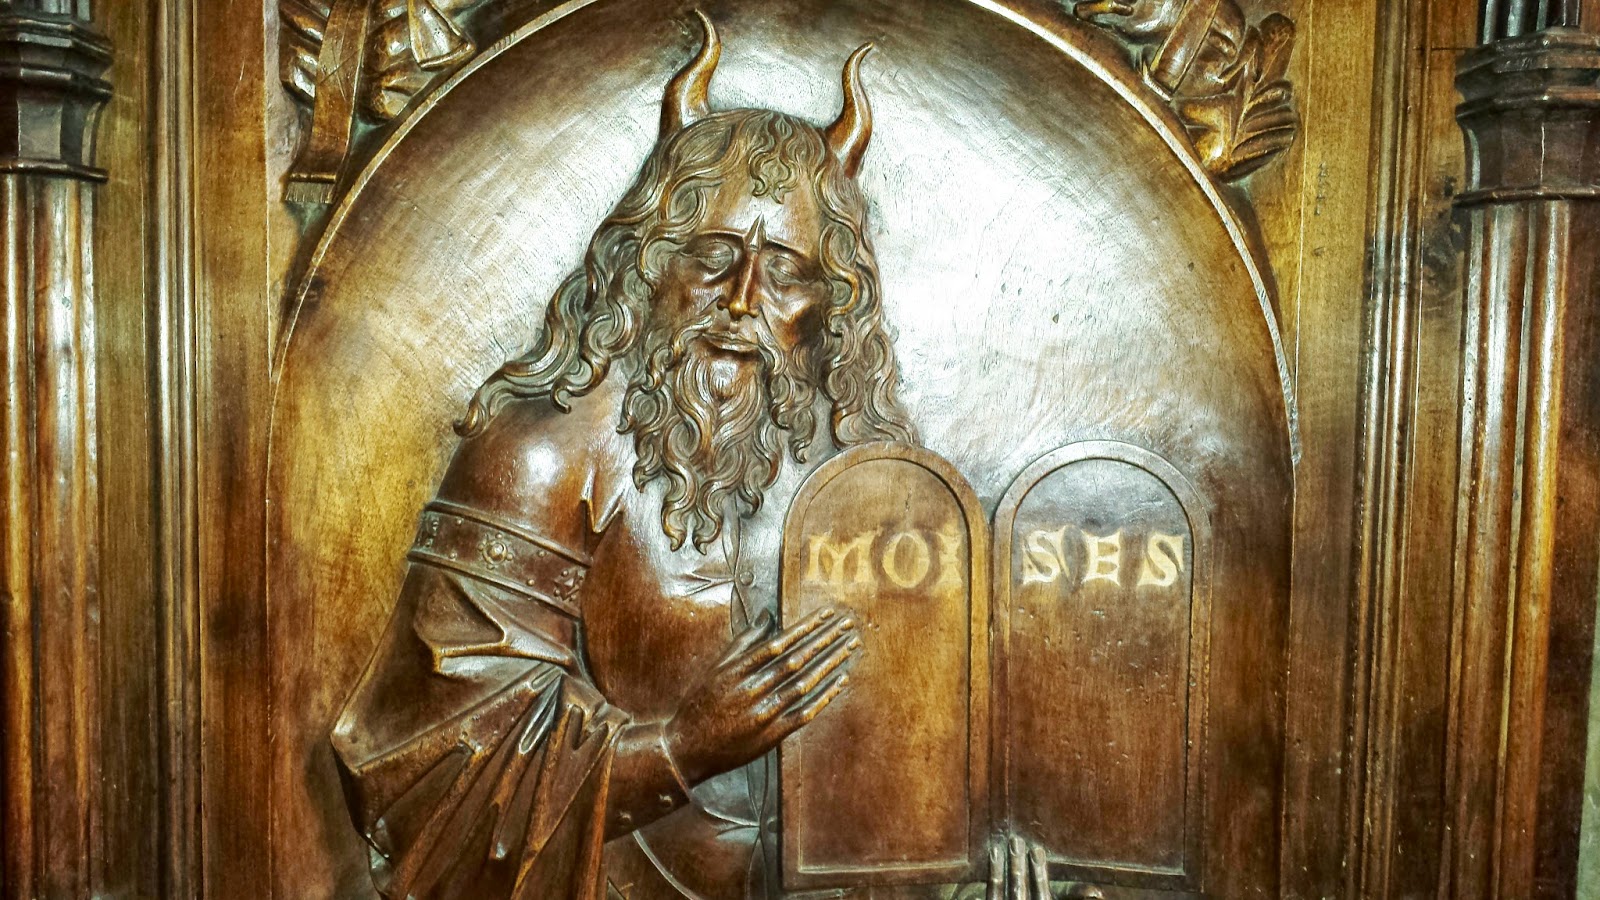 Moses with an Ancient Aleph on his head